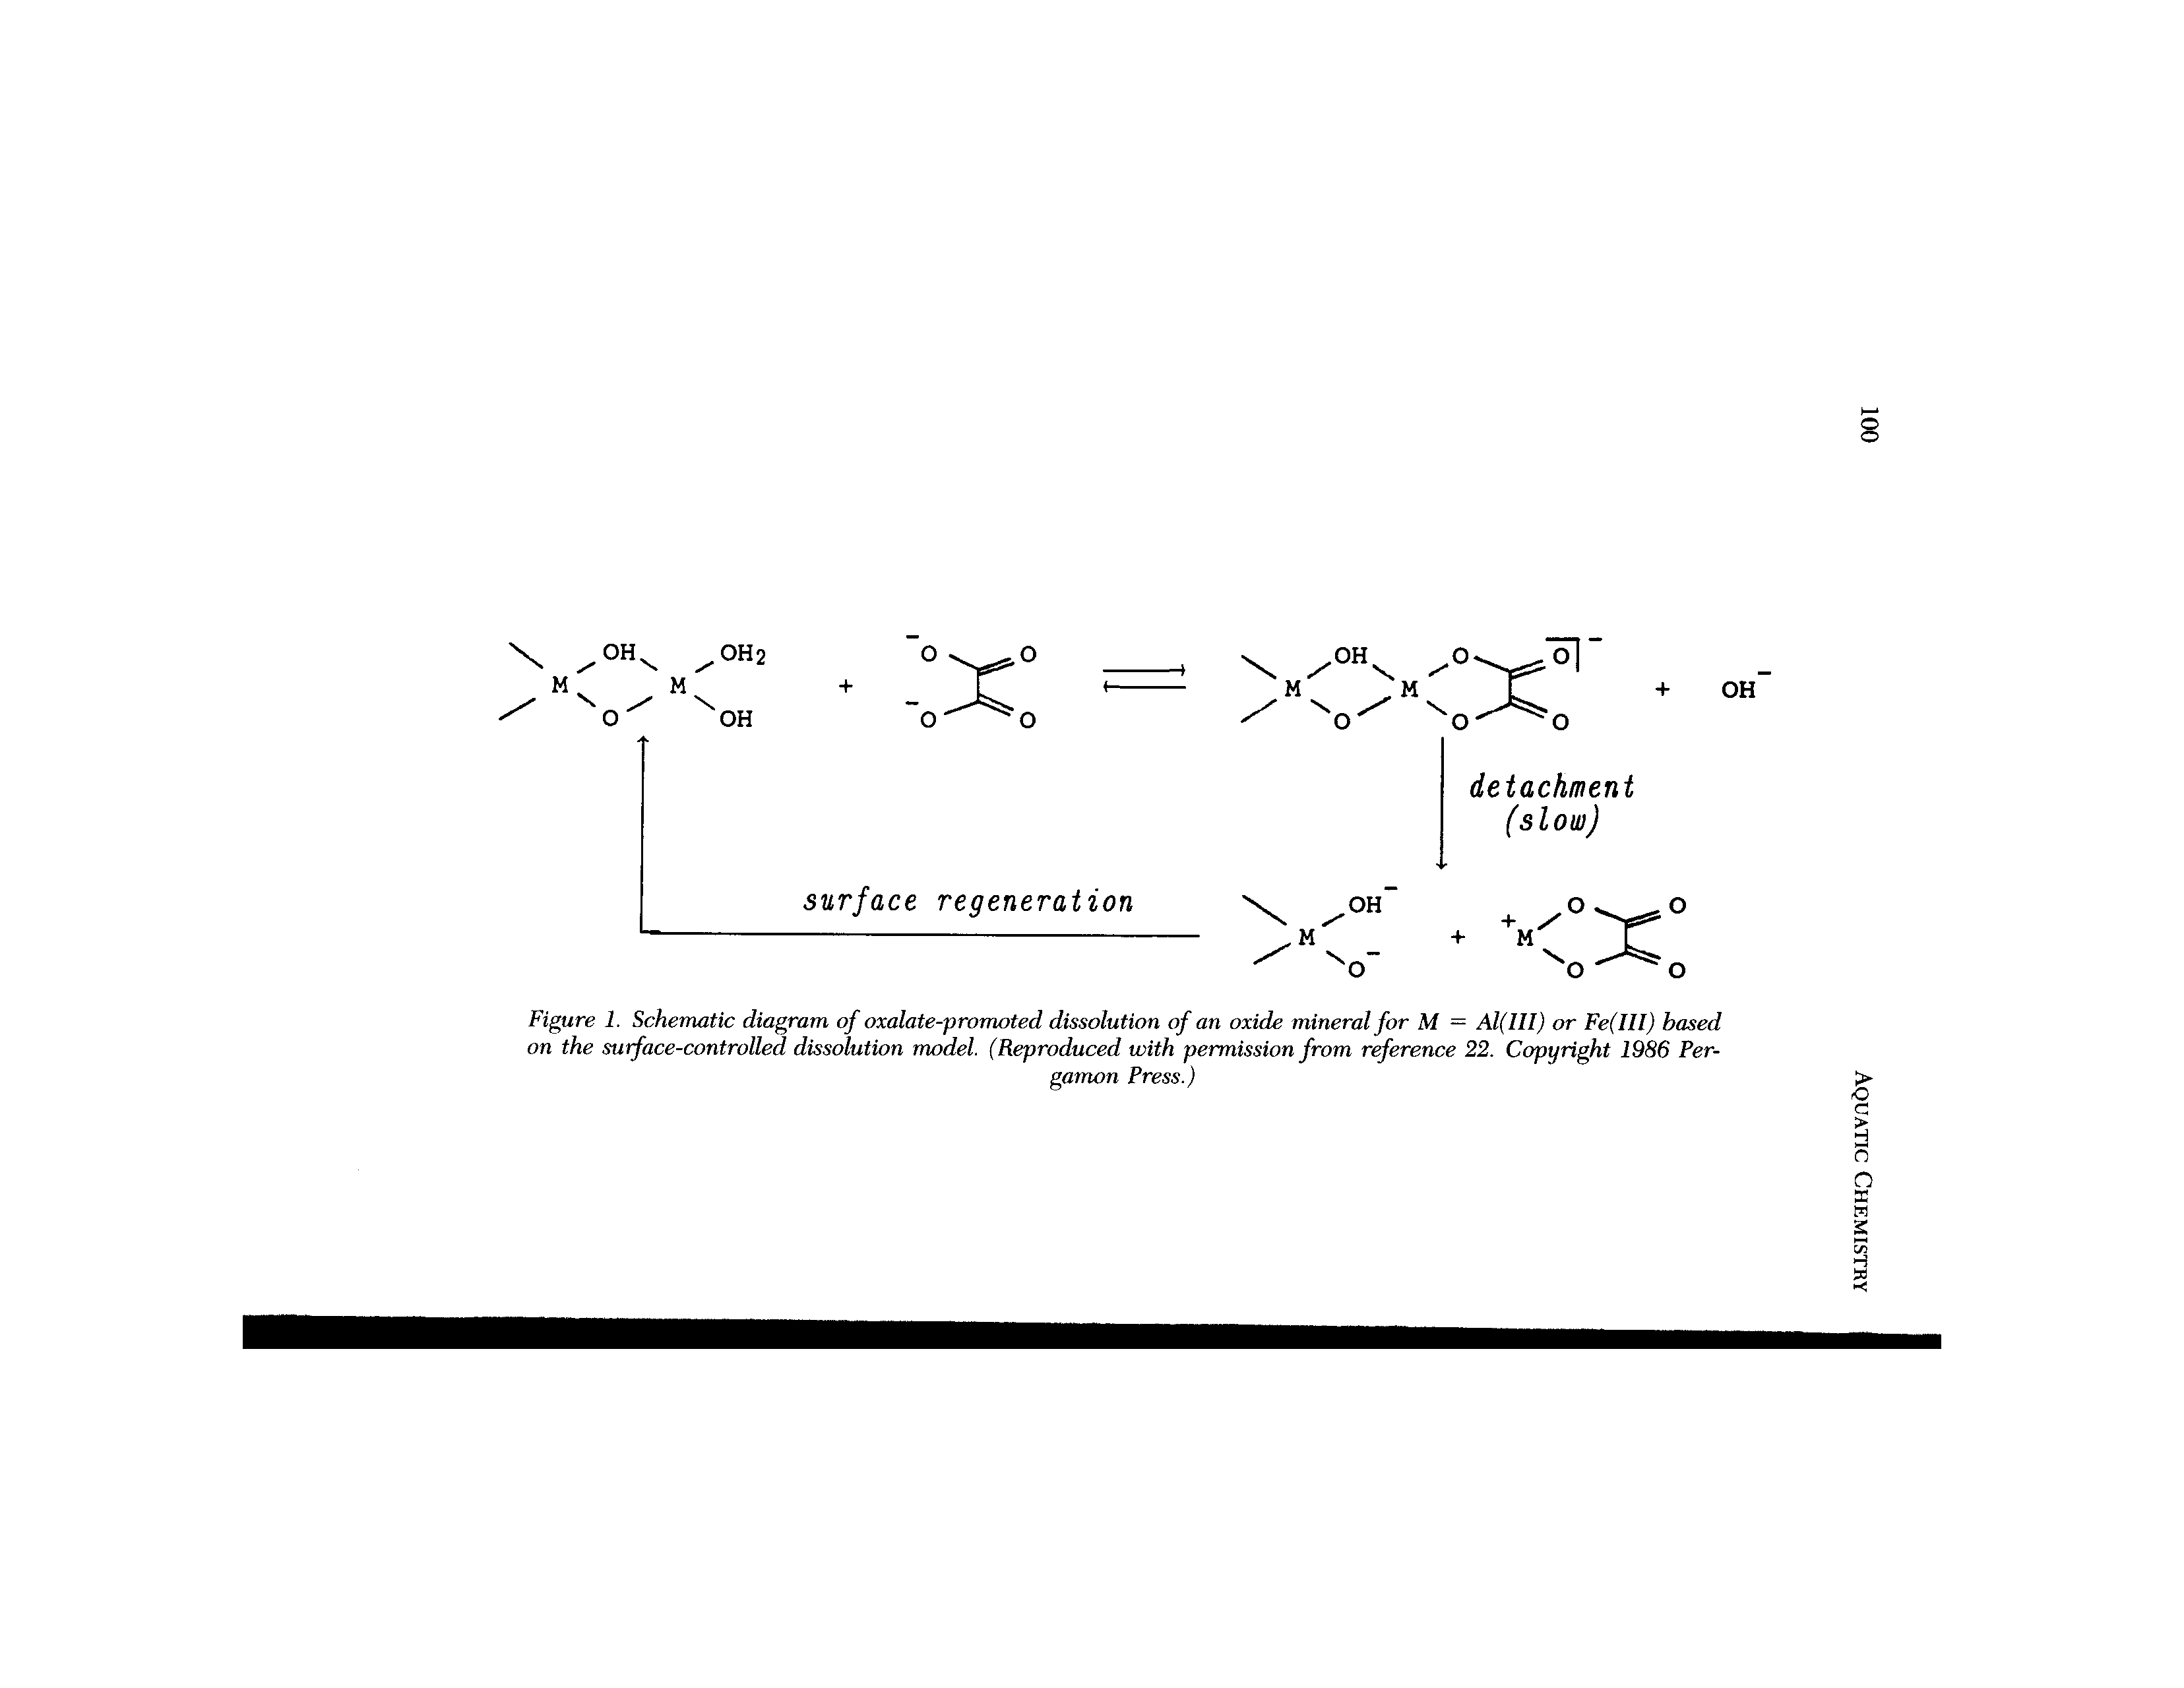 Figure 1. Schematic diagram of oxalate-promoted dissolution of an oxide mineral for M = Al(III) or Fe(III) based on the surface-controlled dissolution model. (Reproduced with permission from reference 22. Copyright 1986 Per-...